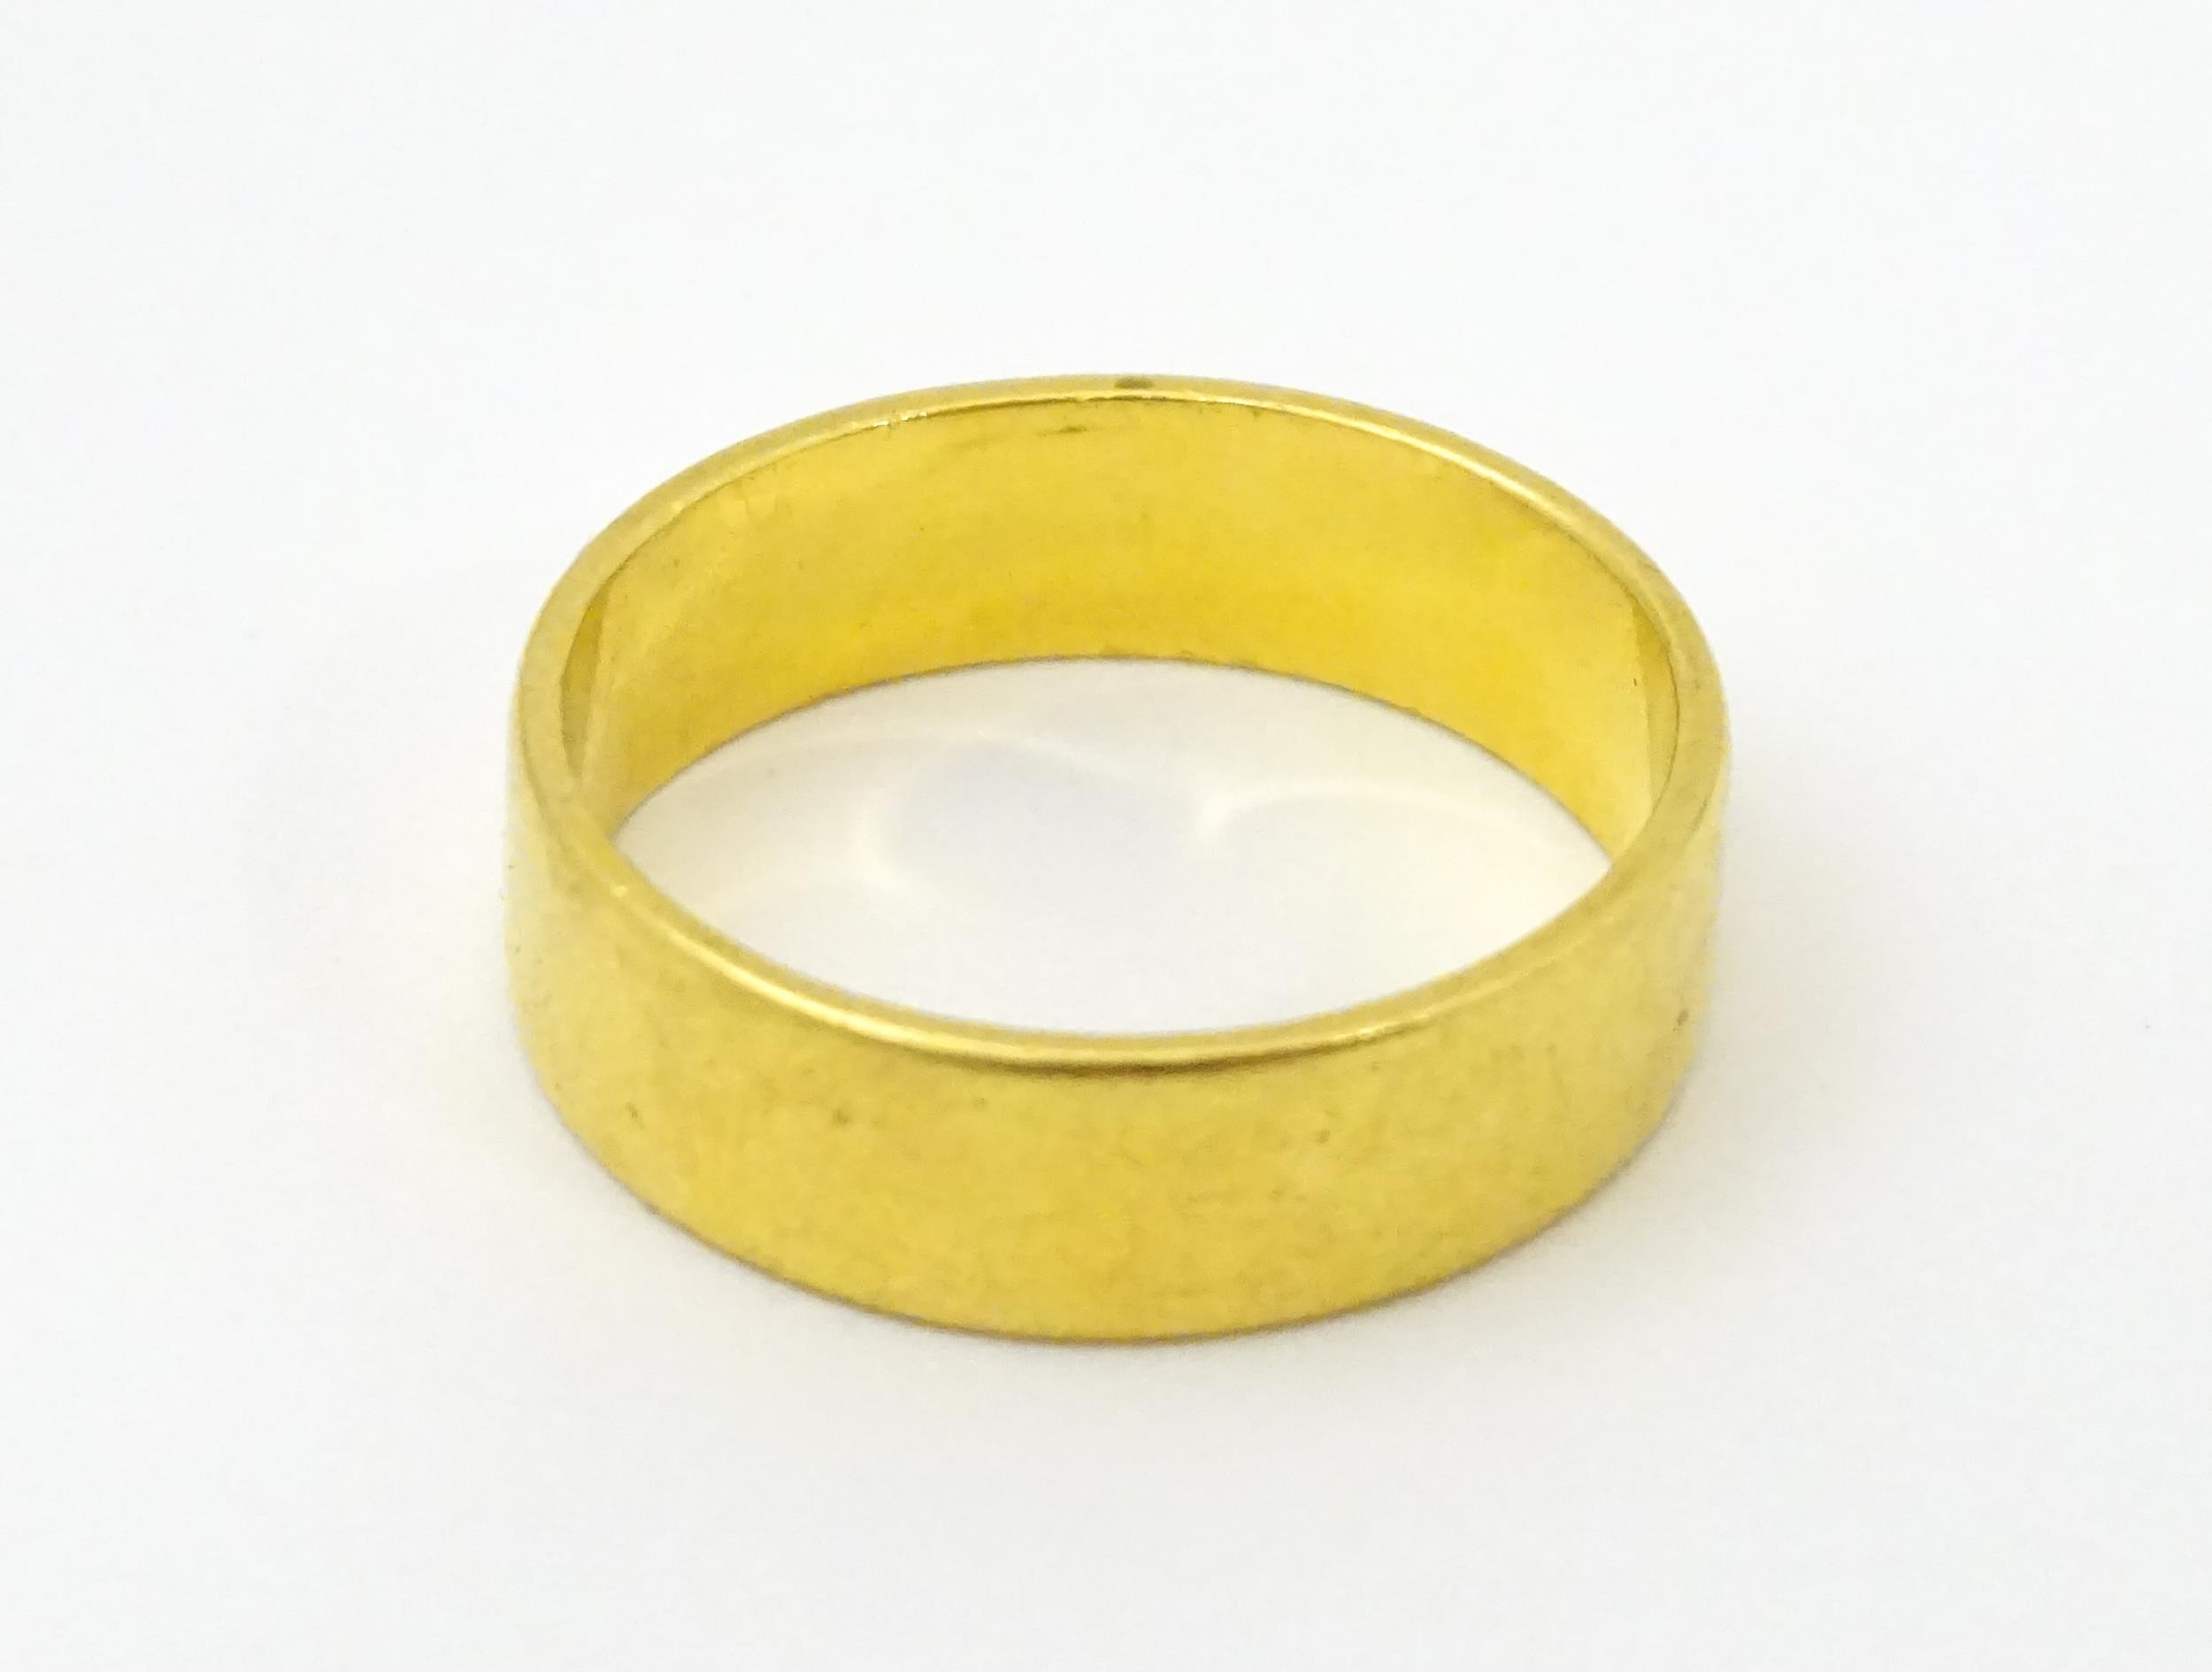 A 22ct gold ring / wedding band. Ring size approx. M 1/2 Please Note - we do not make reference to - Image 6 of 6